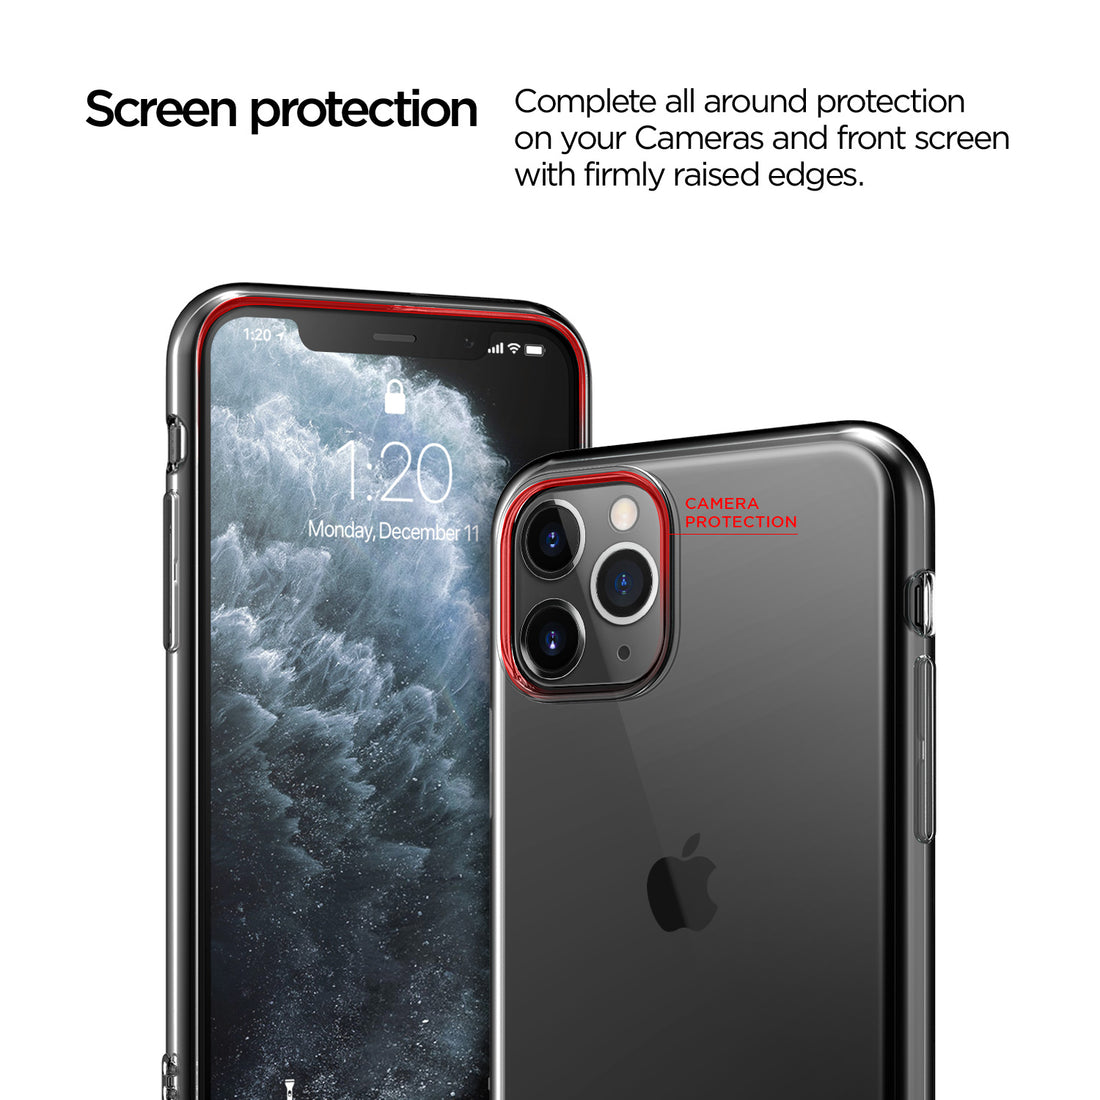 iPhone 11 Pro Case Damda Crystal Fit Anti-yellowing everlasting clear back adds sleek and minimalist design.